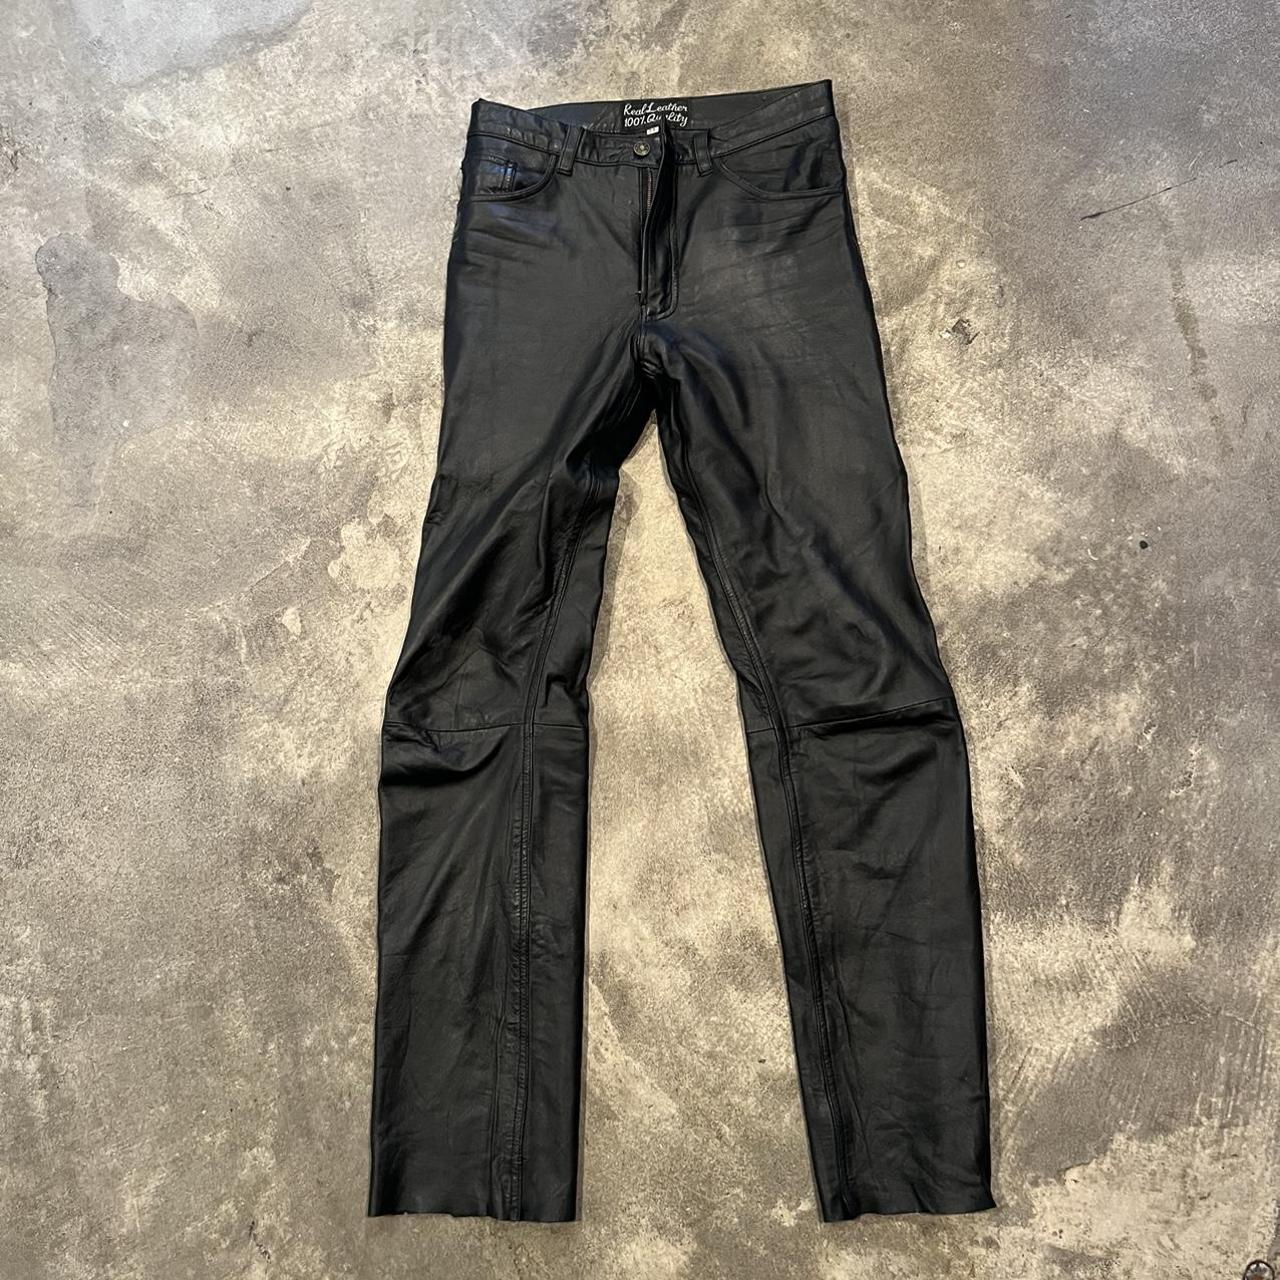 Vintage leather pants, Great quality Worn once,... - Depop